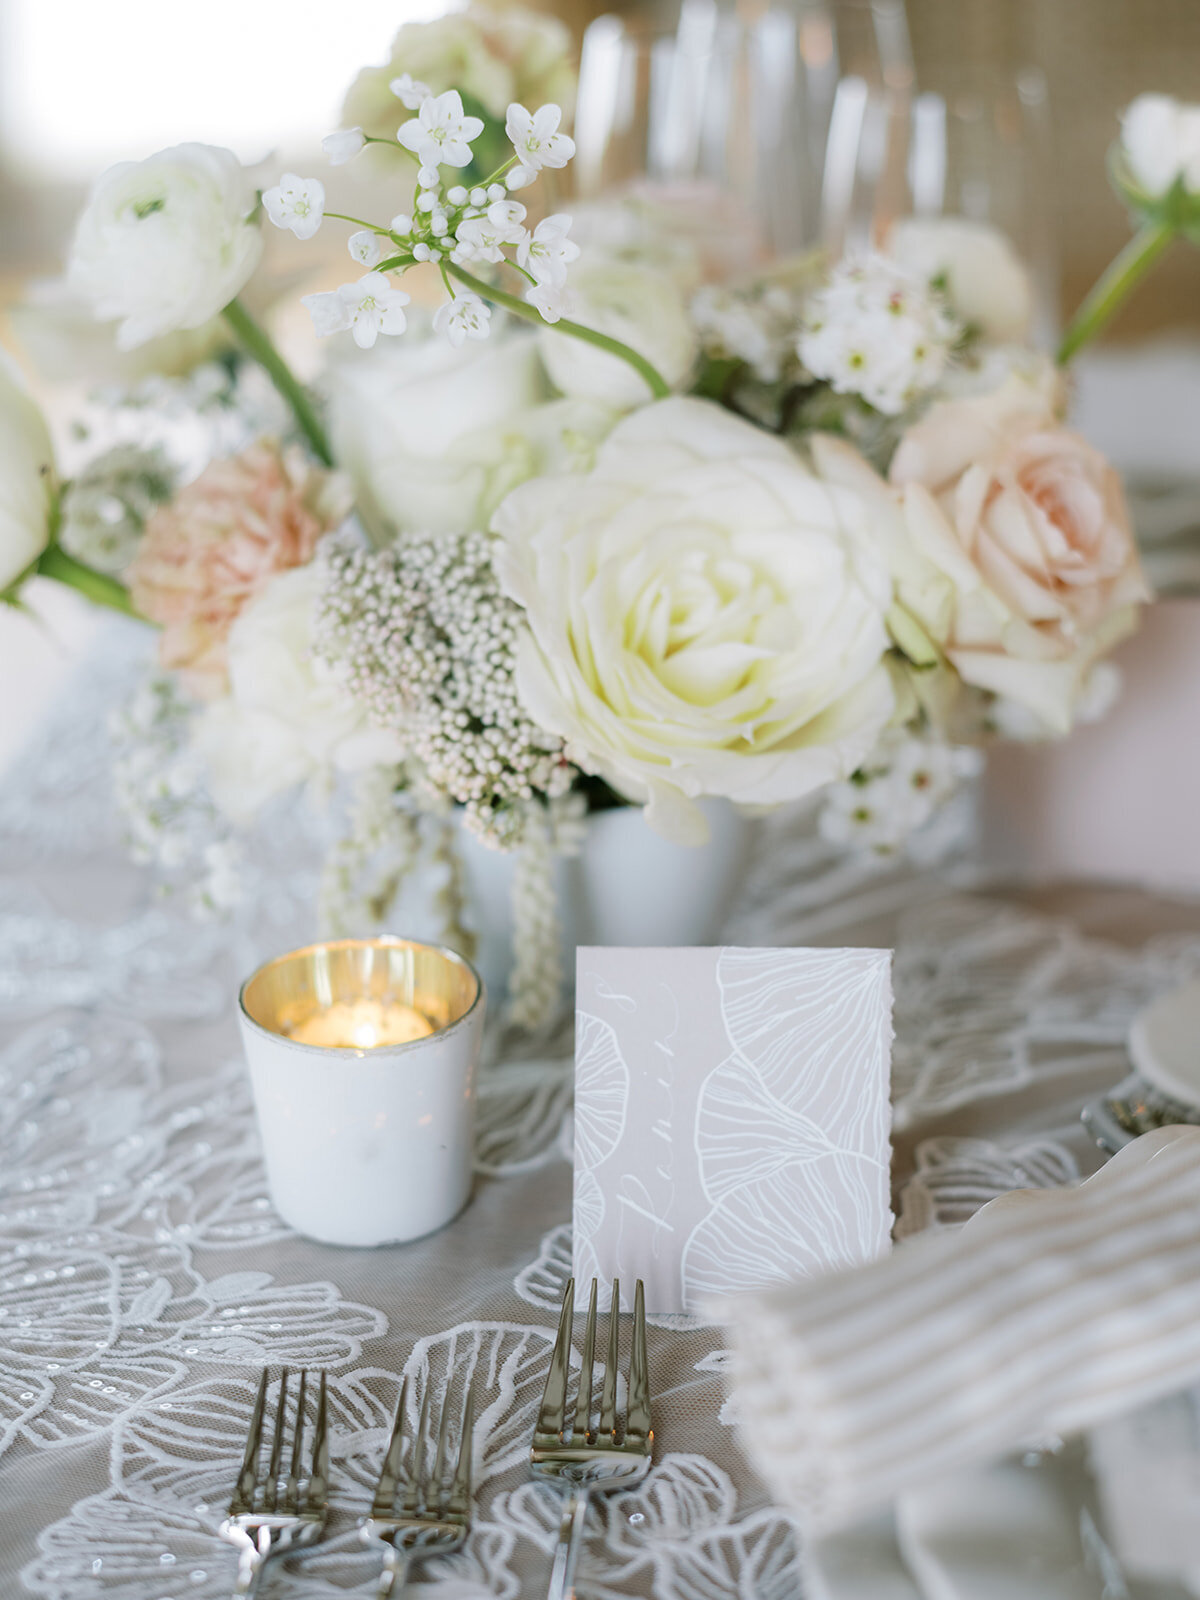 Table setup with candle, forks, floral centerpiece and place card with custom calligraphy